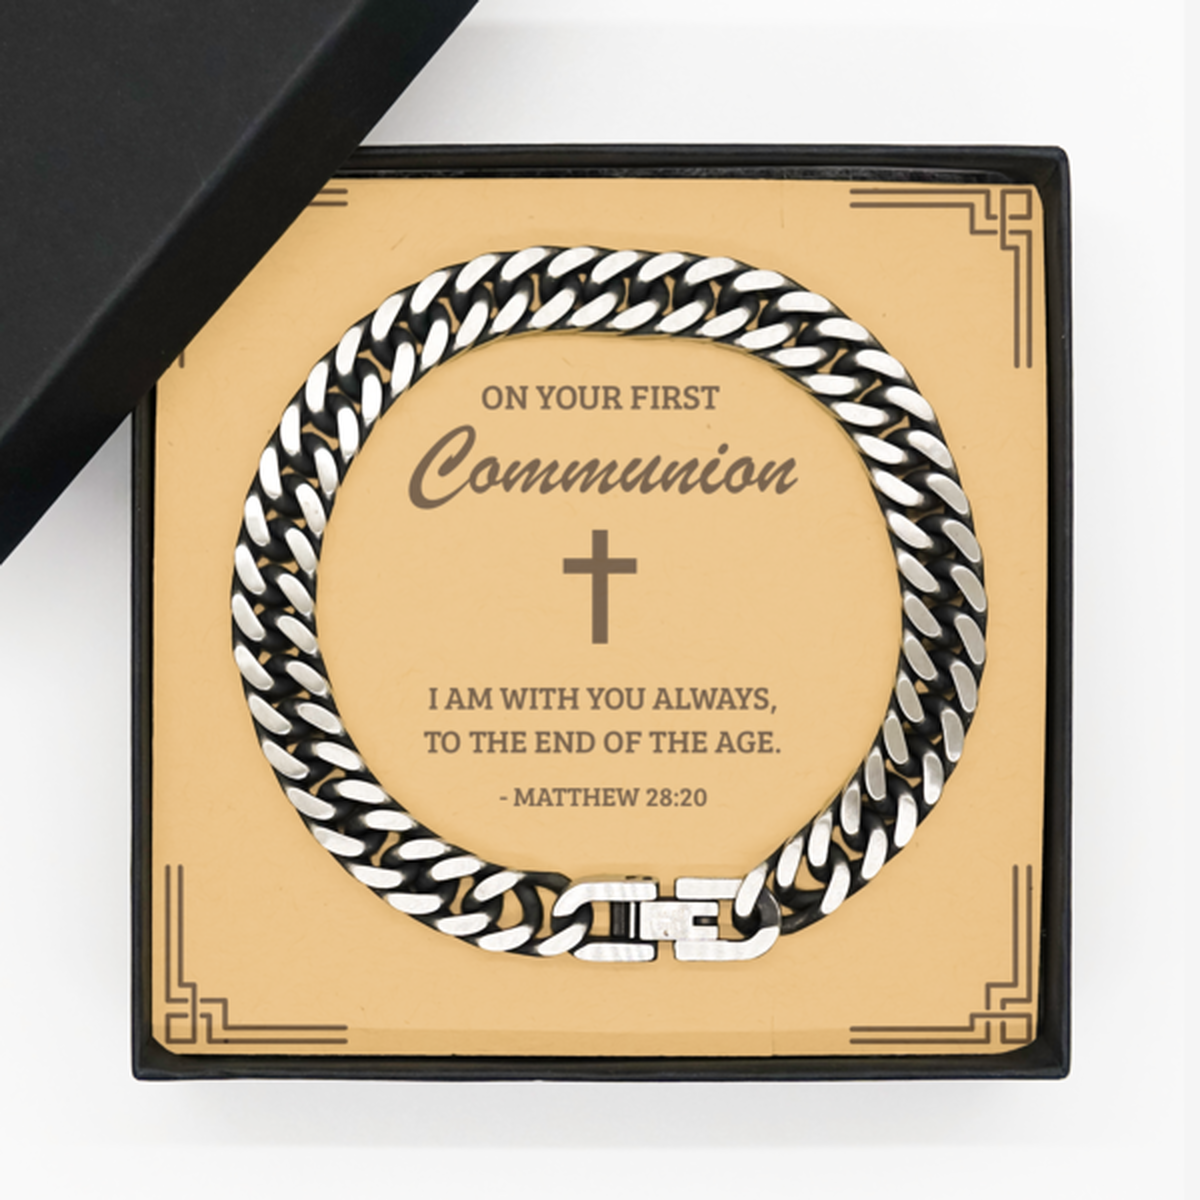 Confirmation Gifts for Teenage Boys, I am with you always, Cuban Link Chain Bracelet with Bible Verse Message Card, Religious Catholic Bracelet for Son, Grandson, Dad, Godfather